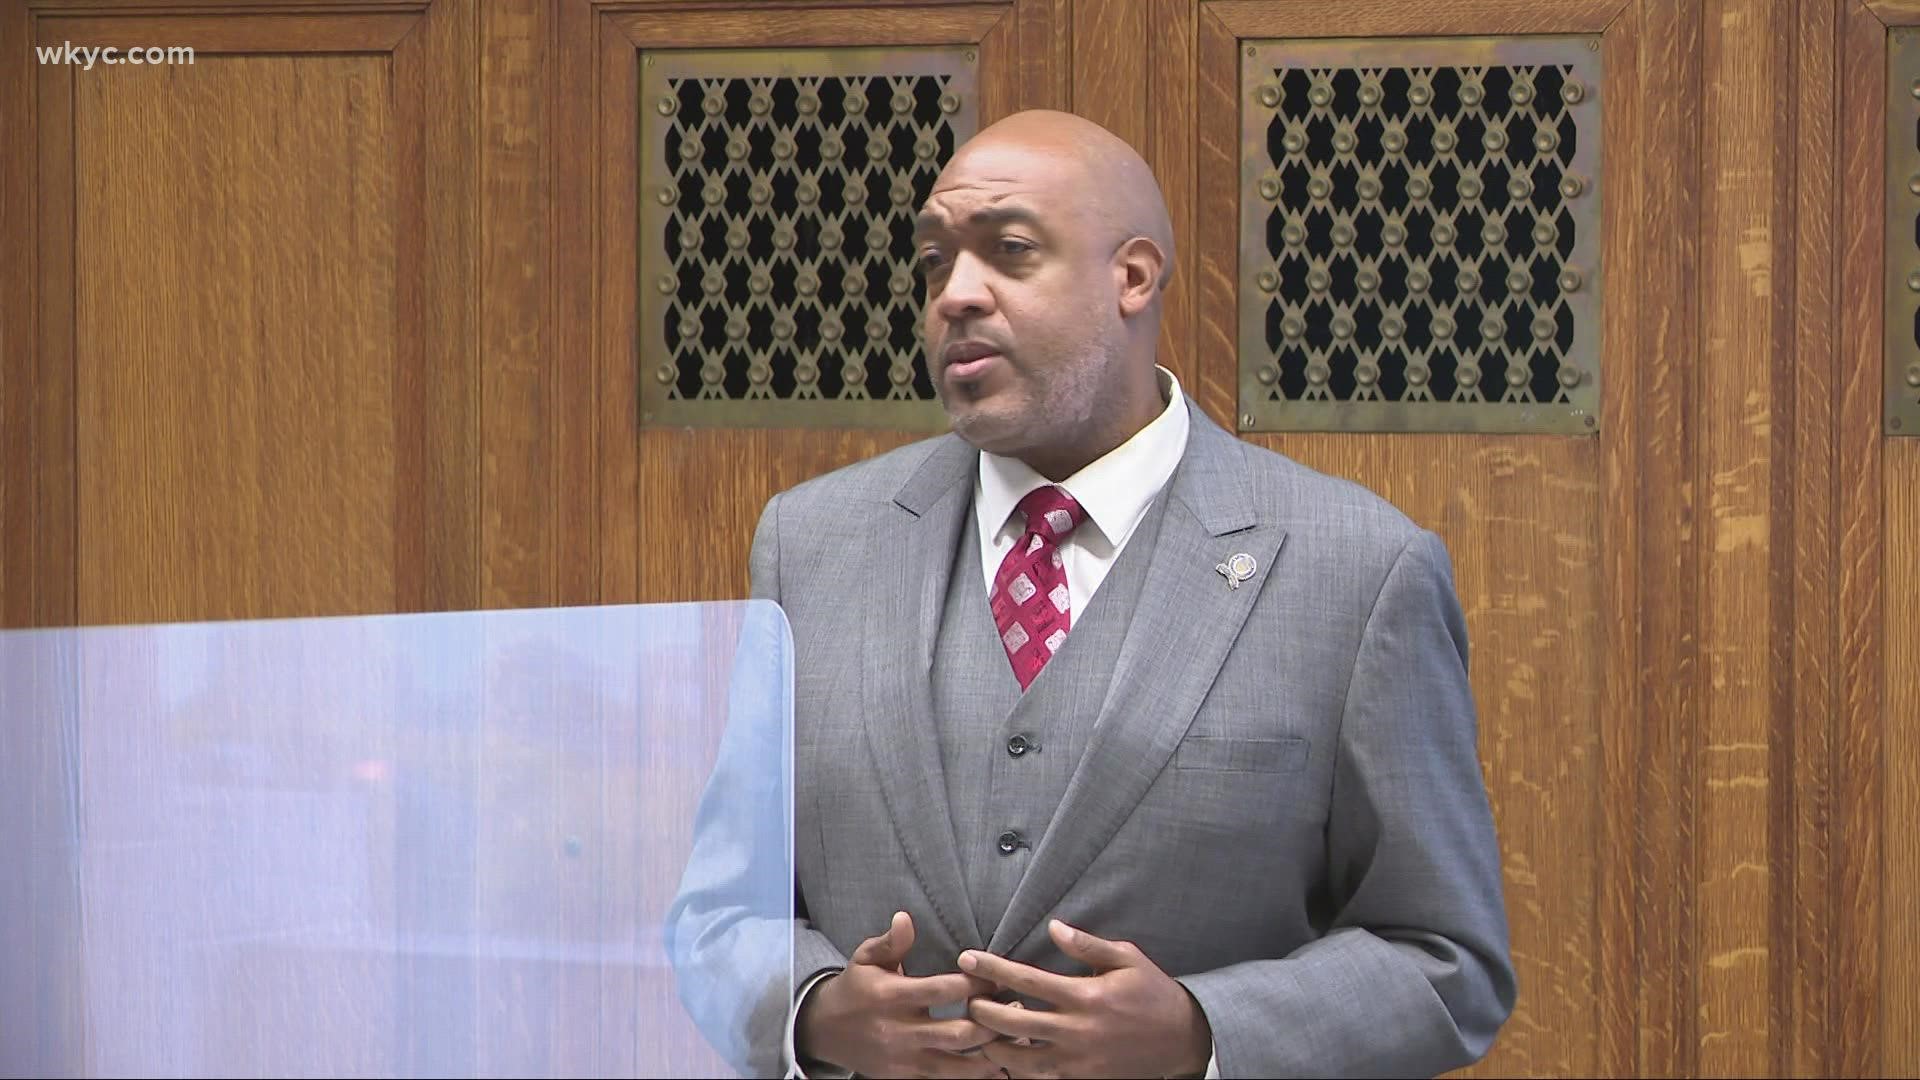 Today the city council elected a new president. He is ward 6 councilman Blaine Griffin..no stranger to Cleveland politics. Sara Shookman reports.